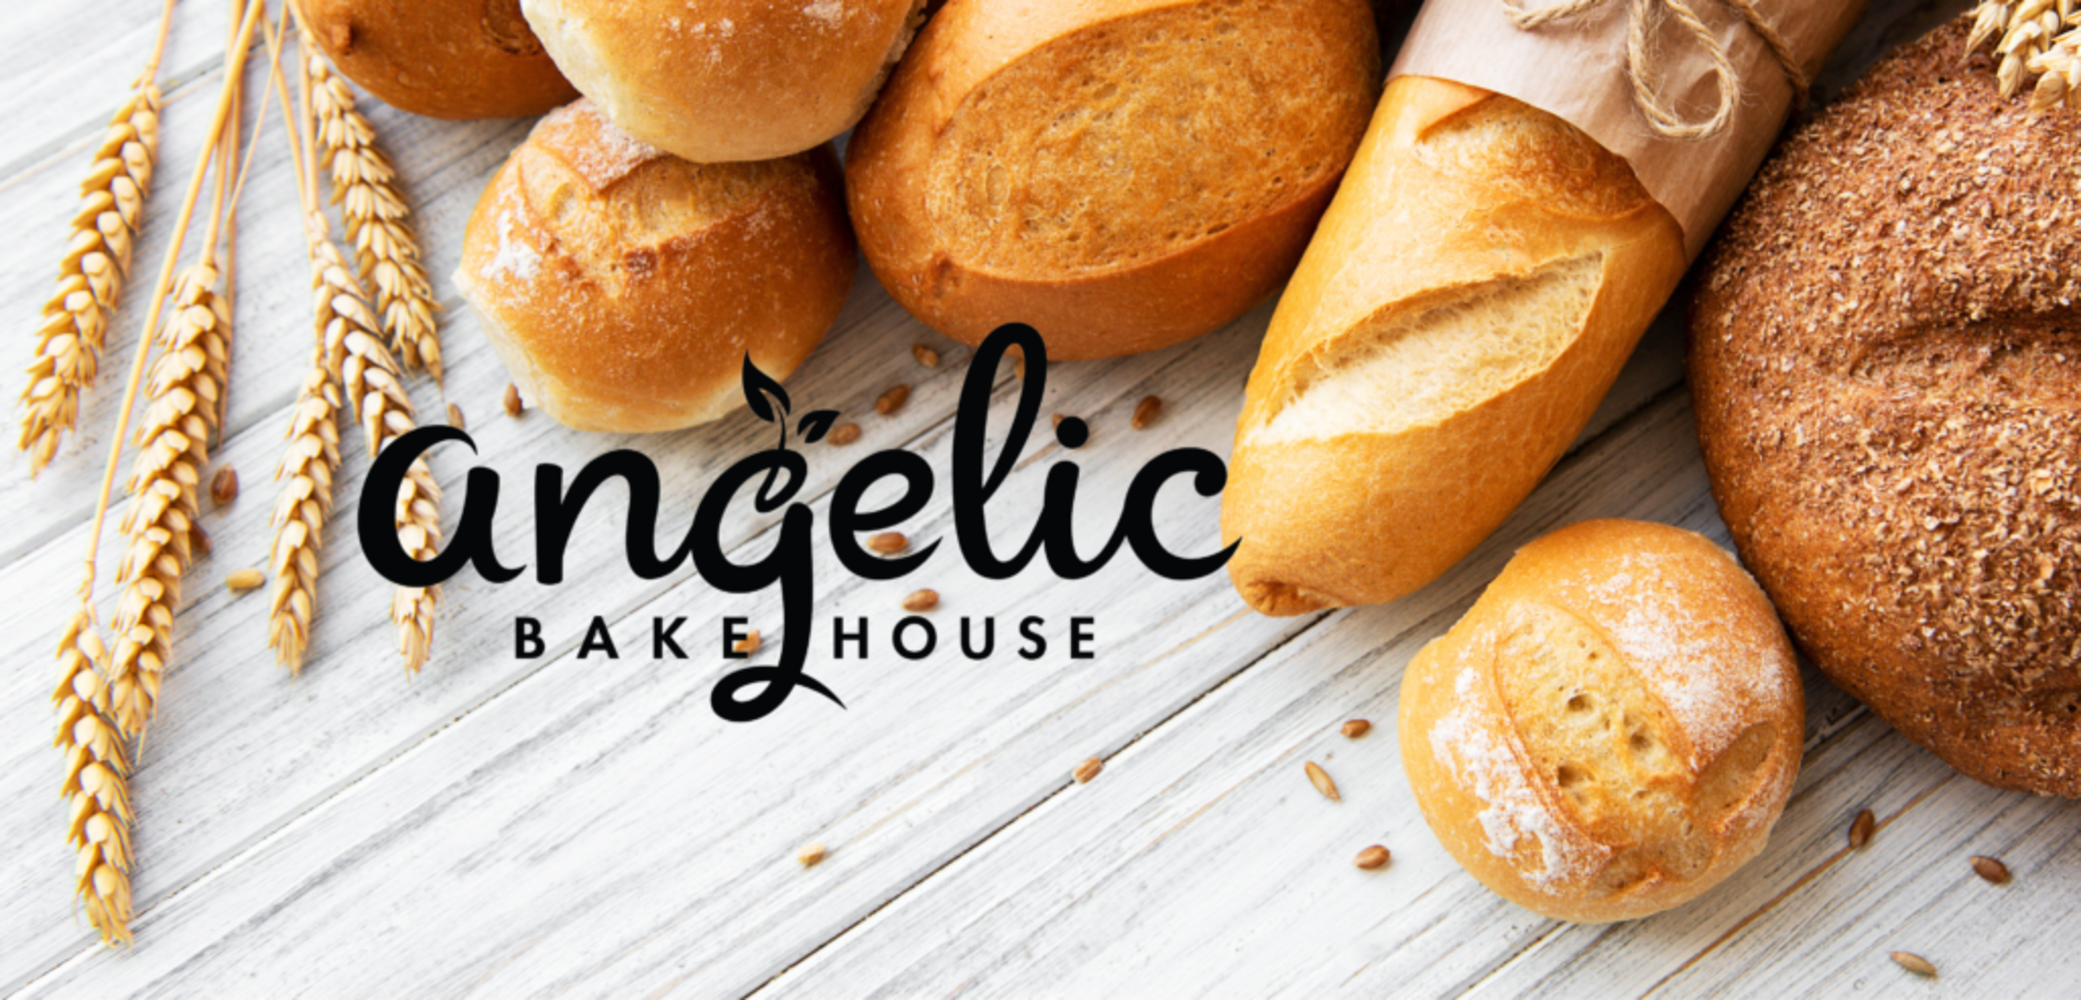 Angelic Bakehouse: NEW CLOSING 6/5 Tortilla, Flatbread, Bun Plant: 2018 W&P, Apache & Superior, Rack Ovens, Mixers, Cooling, Stackers, Packaging